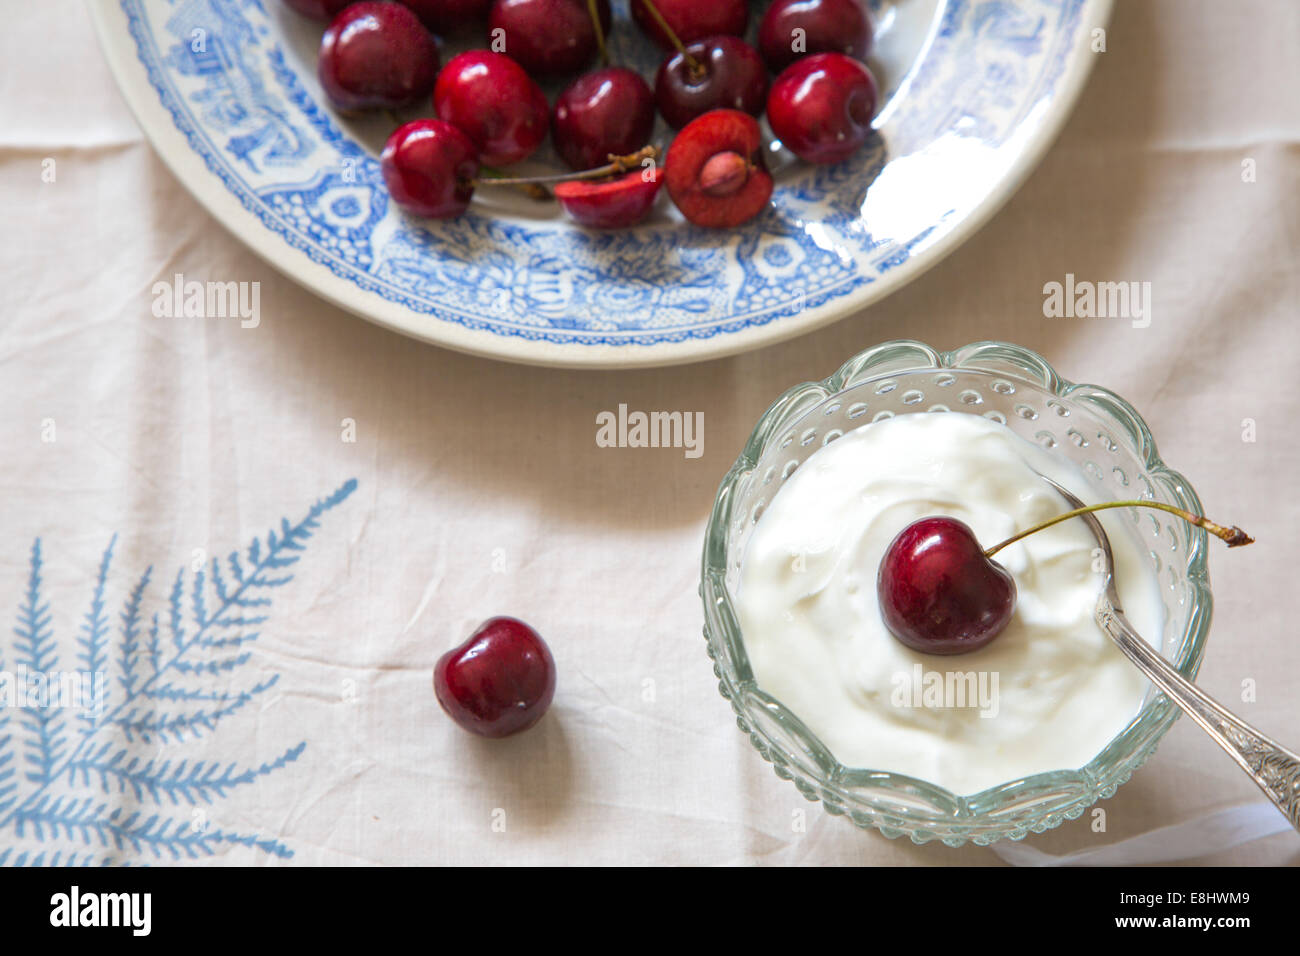 whole cherries on blue ceramic plate, on leaf linen and cream or yogurt in glass dish Stock Photo